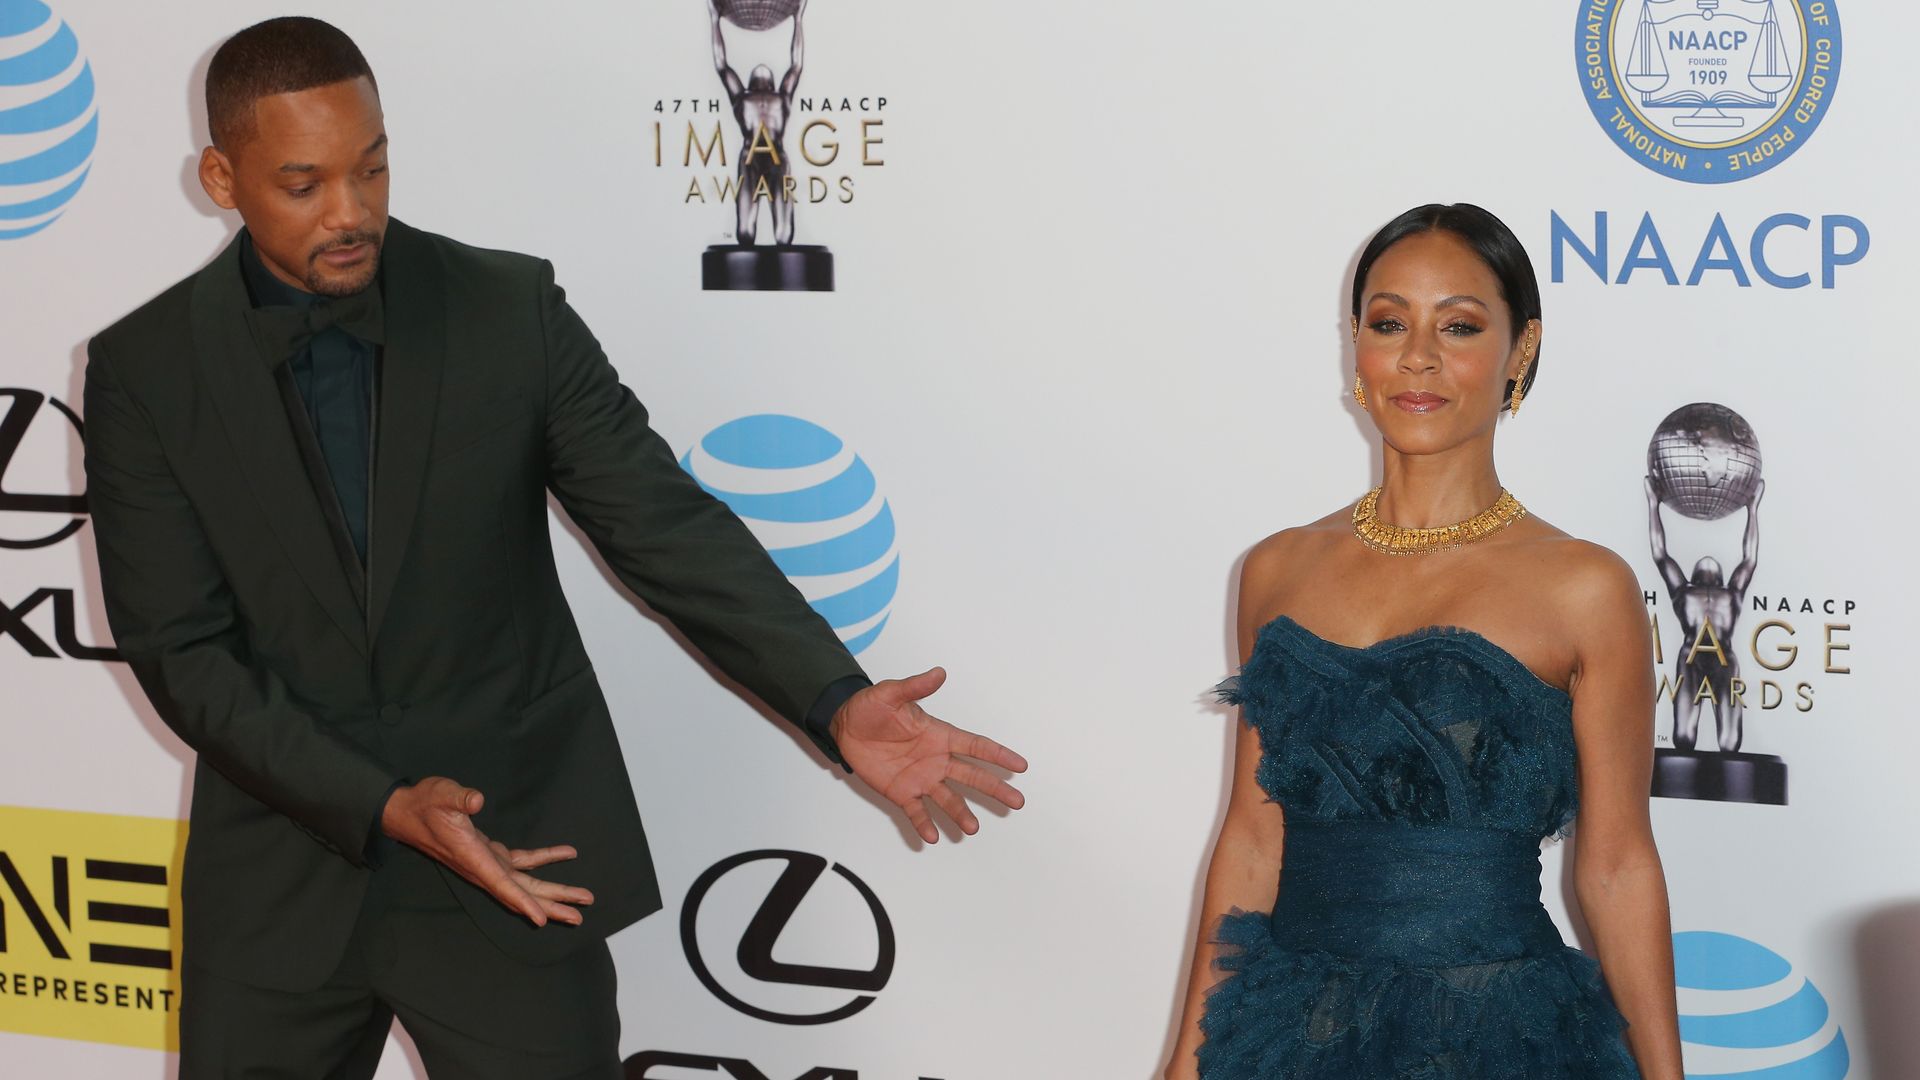 Will Smith and Jada Pinkett Smith at a red carpet event, Will is celebrating his wife by stepping to the side and pointing at her